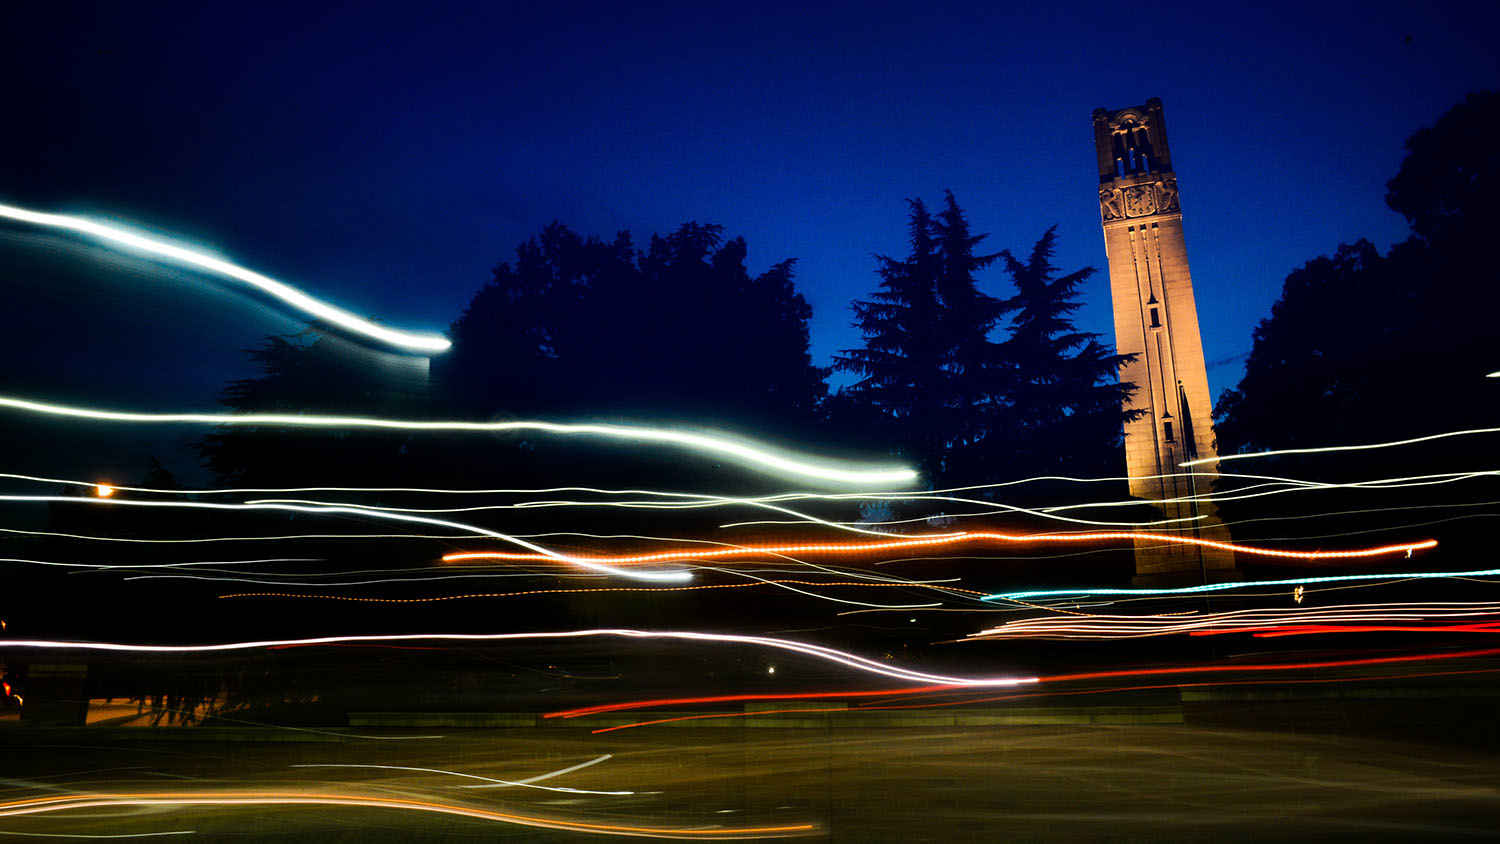 The NC State Belltower at dusk and night. Photo by Marc Hall